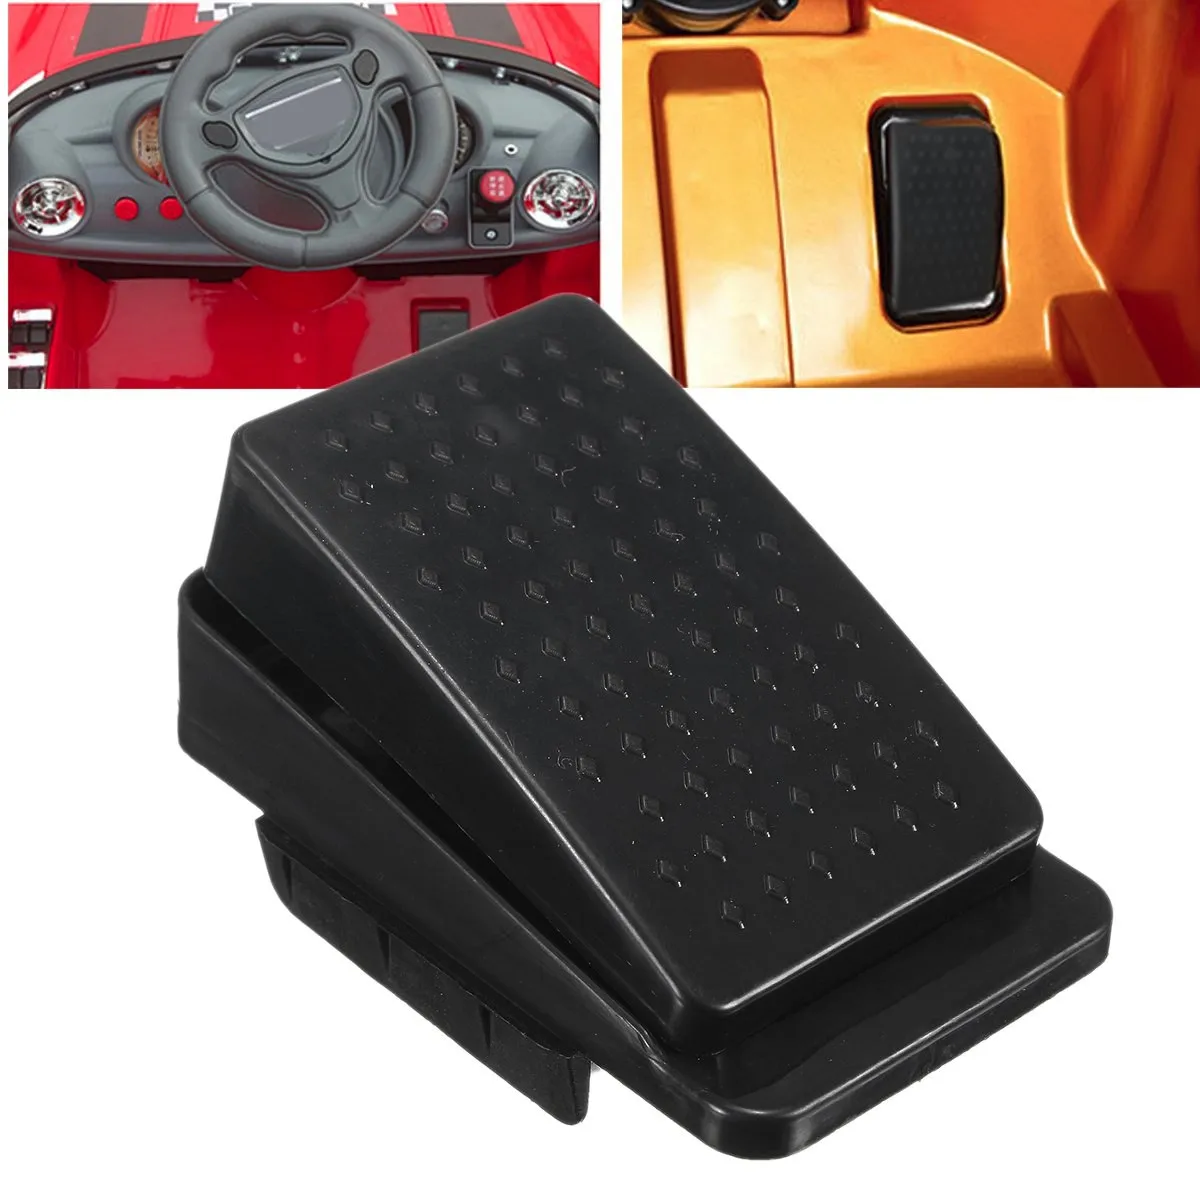 Replacement Foot Pedal Reset Control Switch For Kids Ride On Toy Car 6v/12v Peda 